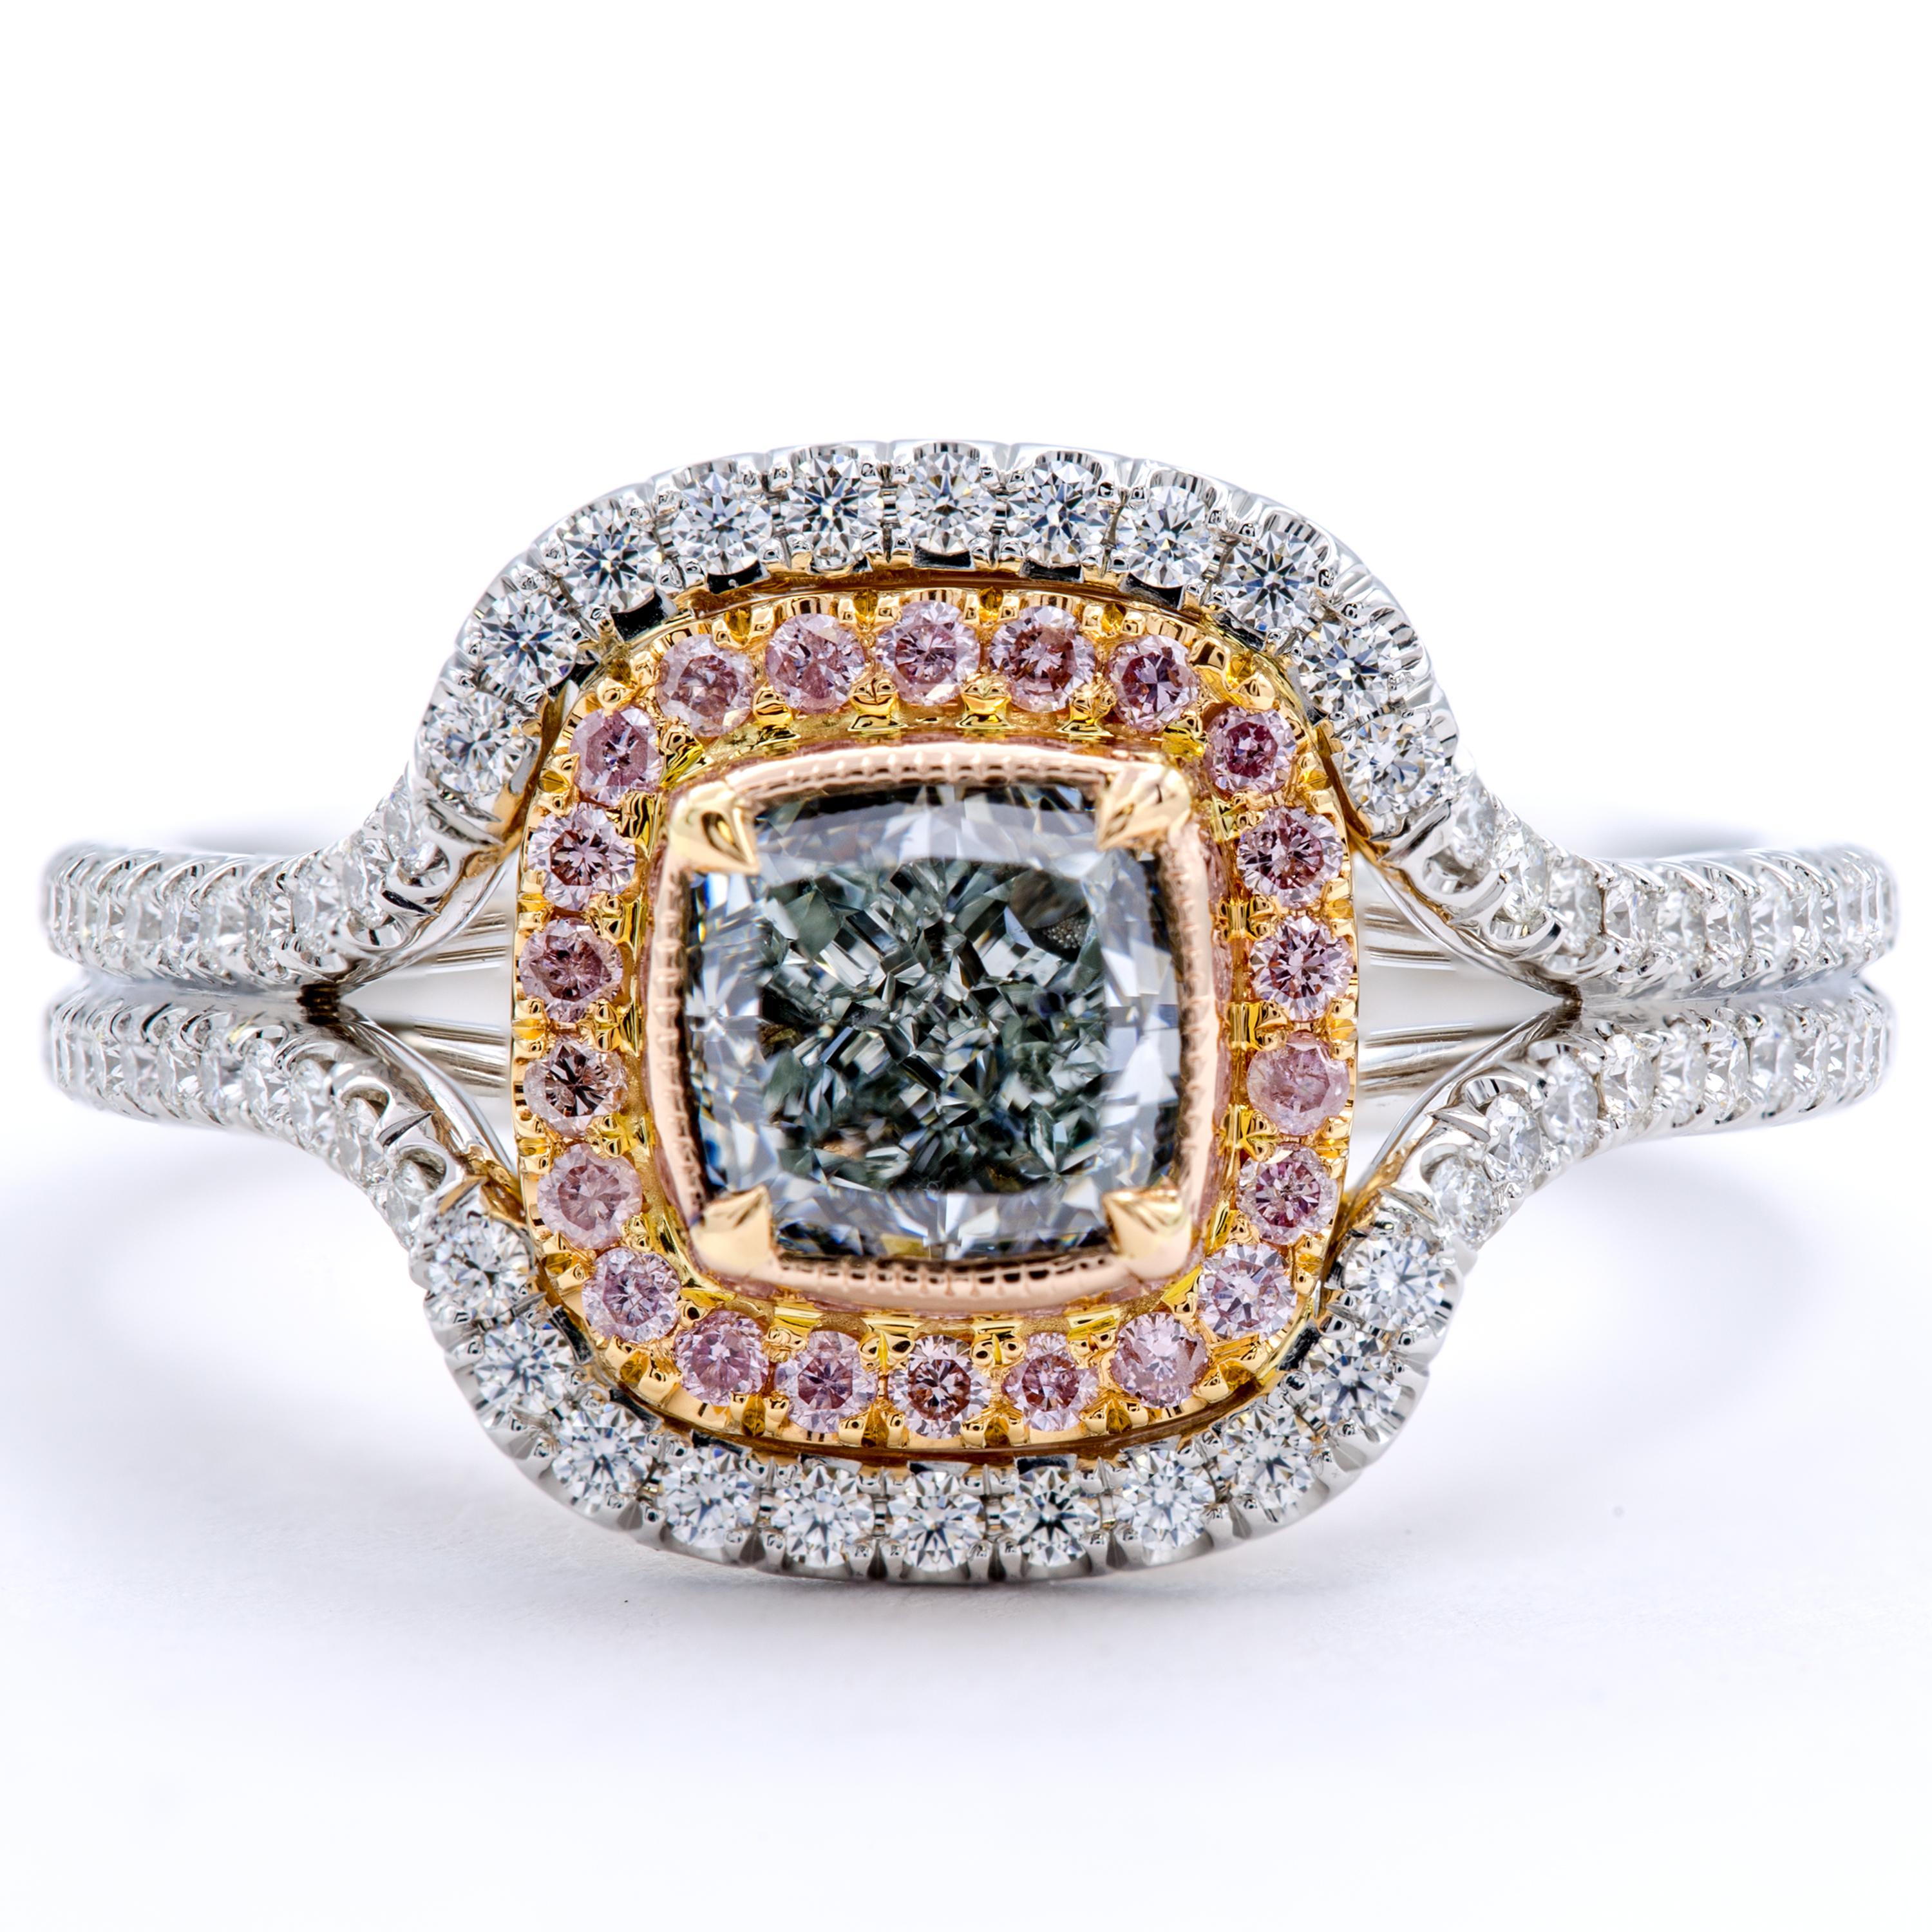 A perfectly petite and incredibly rare GIA certified fancy natural very light green rests within a halo of beautiful pink and white round brilliant pave diamonds. The band features smooth 18Kt white and rose gold formed into an accentuating band.